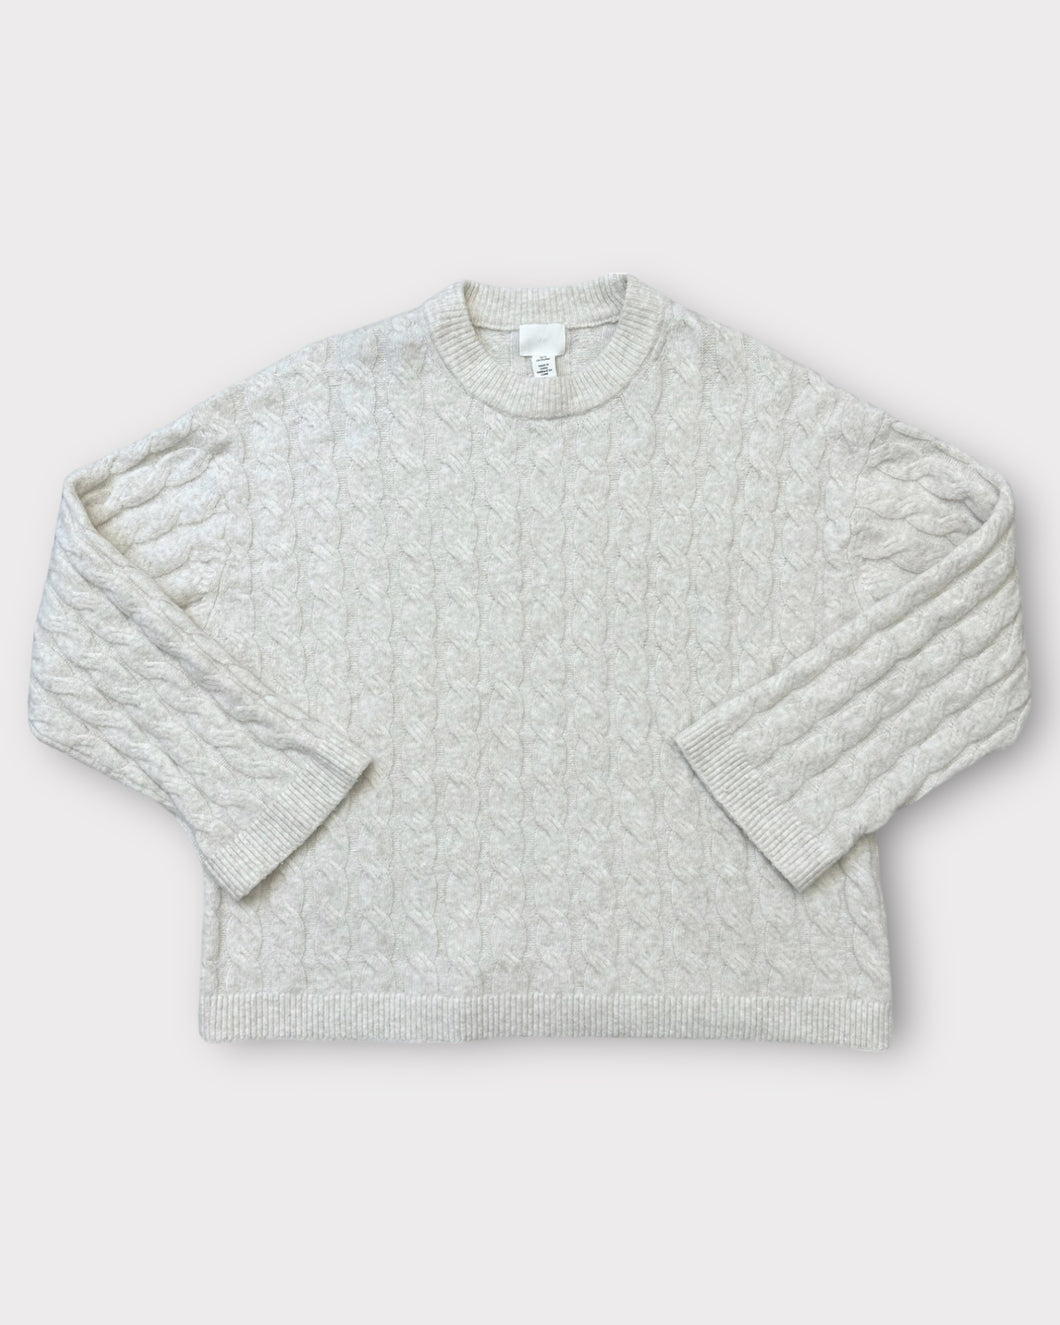 H&M Oversized Ivory Cable Knit Wool Sweater (M)